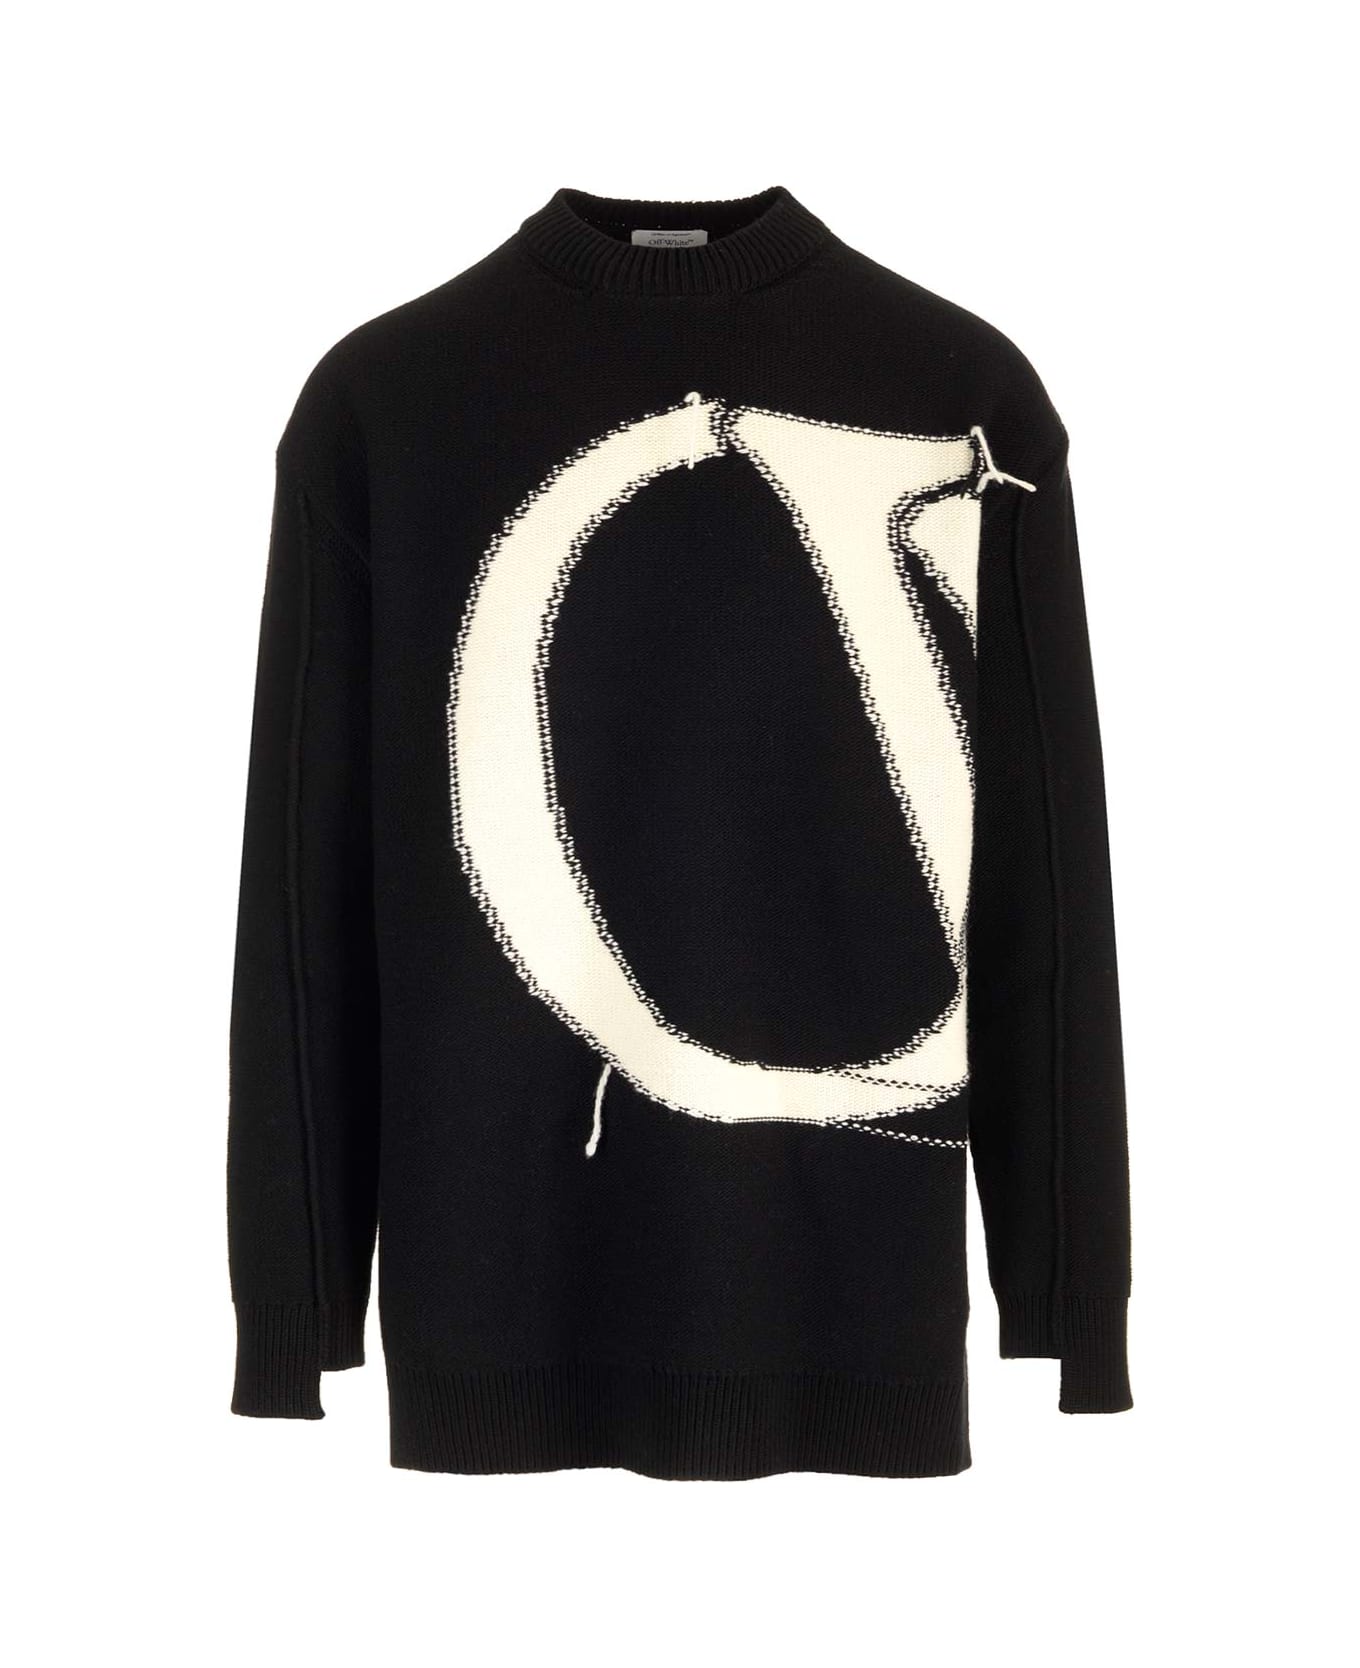 Off-White 'ow' Wool Sweater - Black